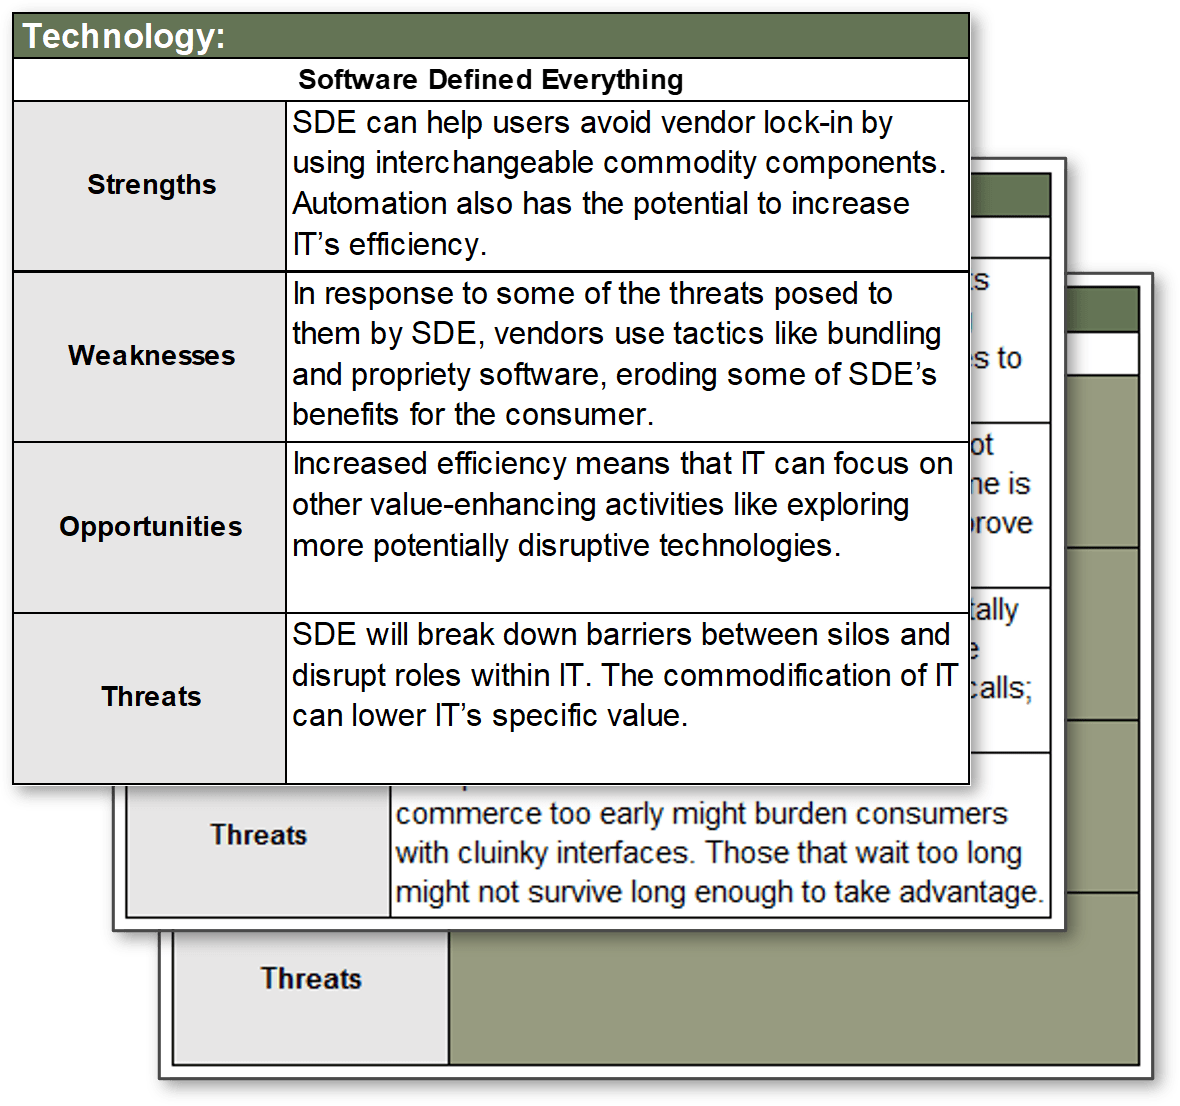 This image contains screenshots of the technology tab of the Disruptive Technology Value-Readiness and SWOT Analysis Tool.